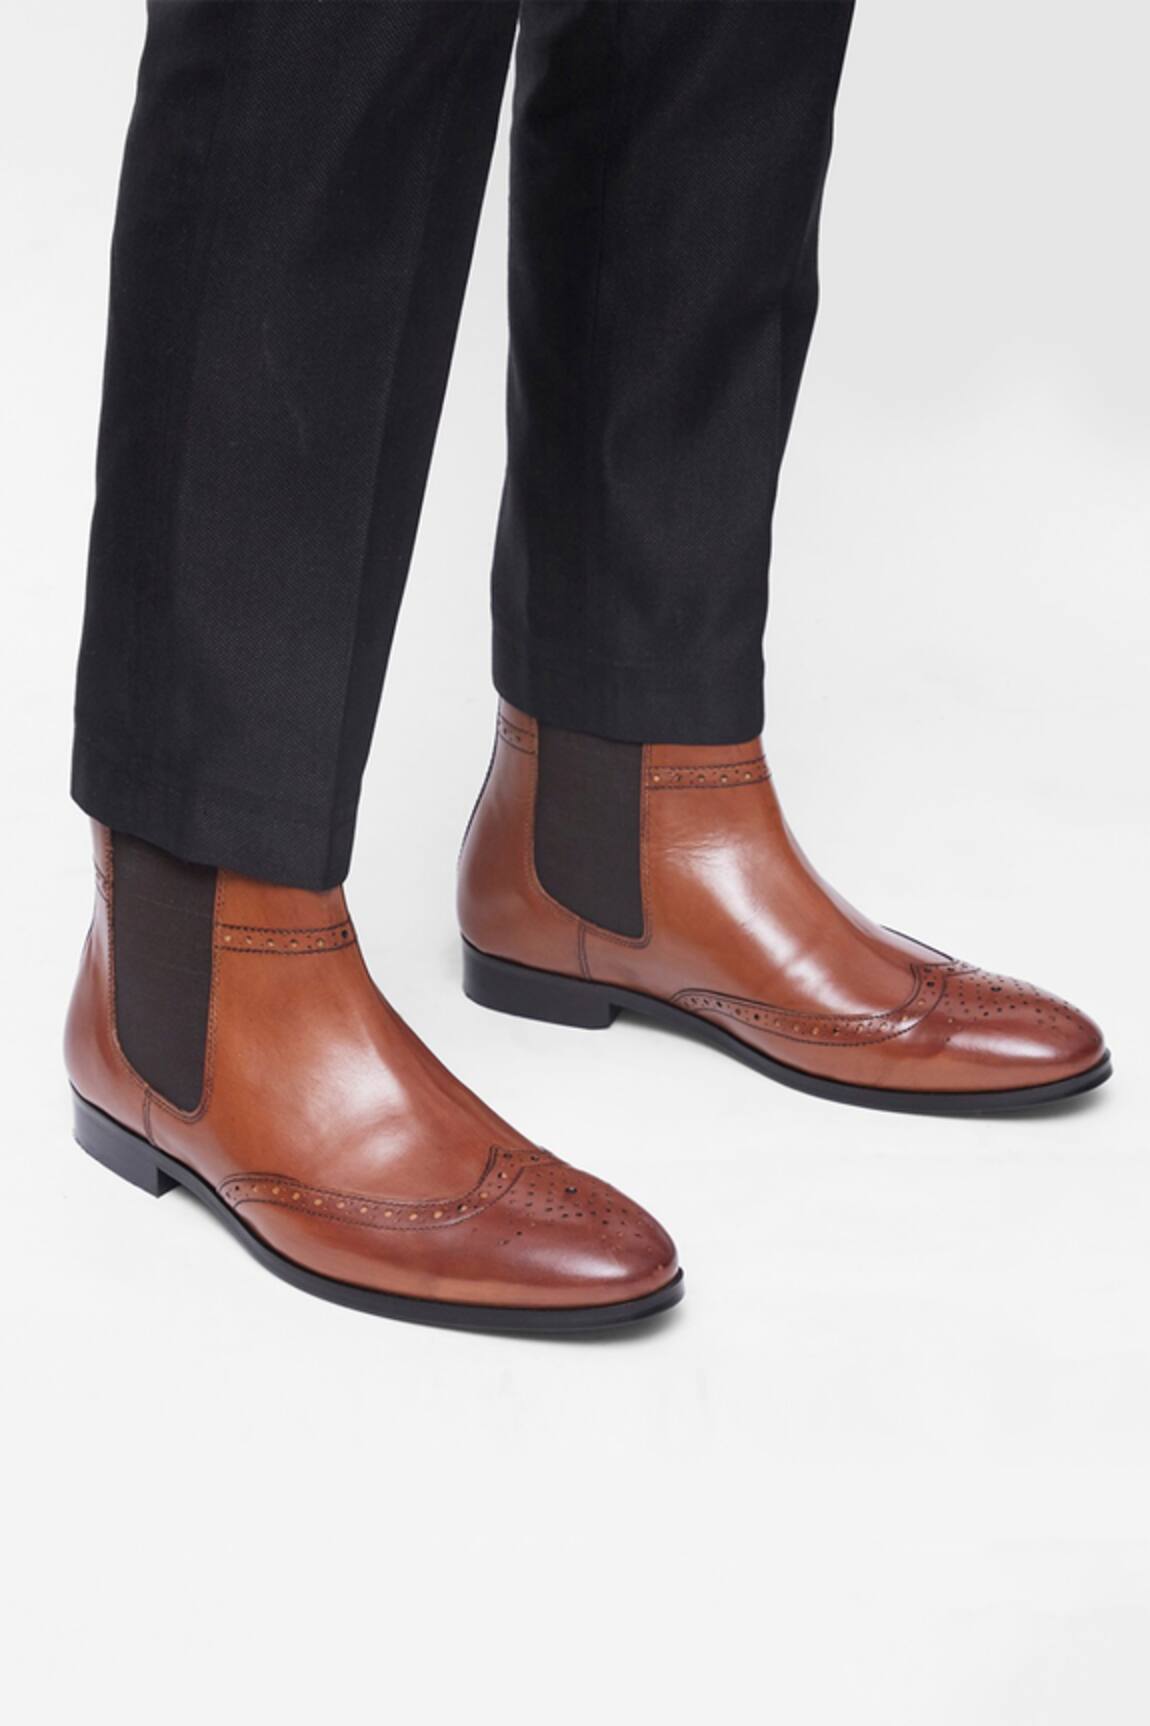 Hats Off Accessories Genuine Leather Wing-Tip Chelsea Boots